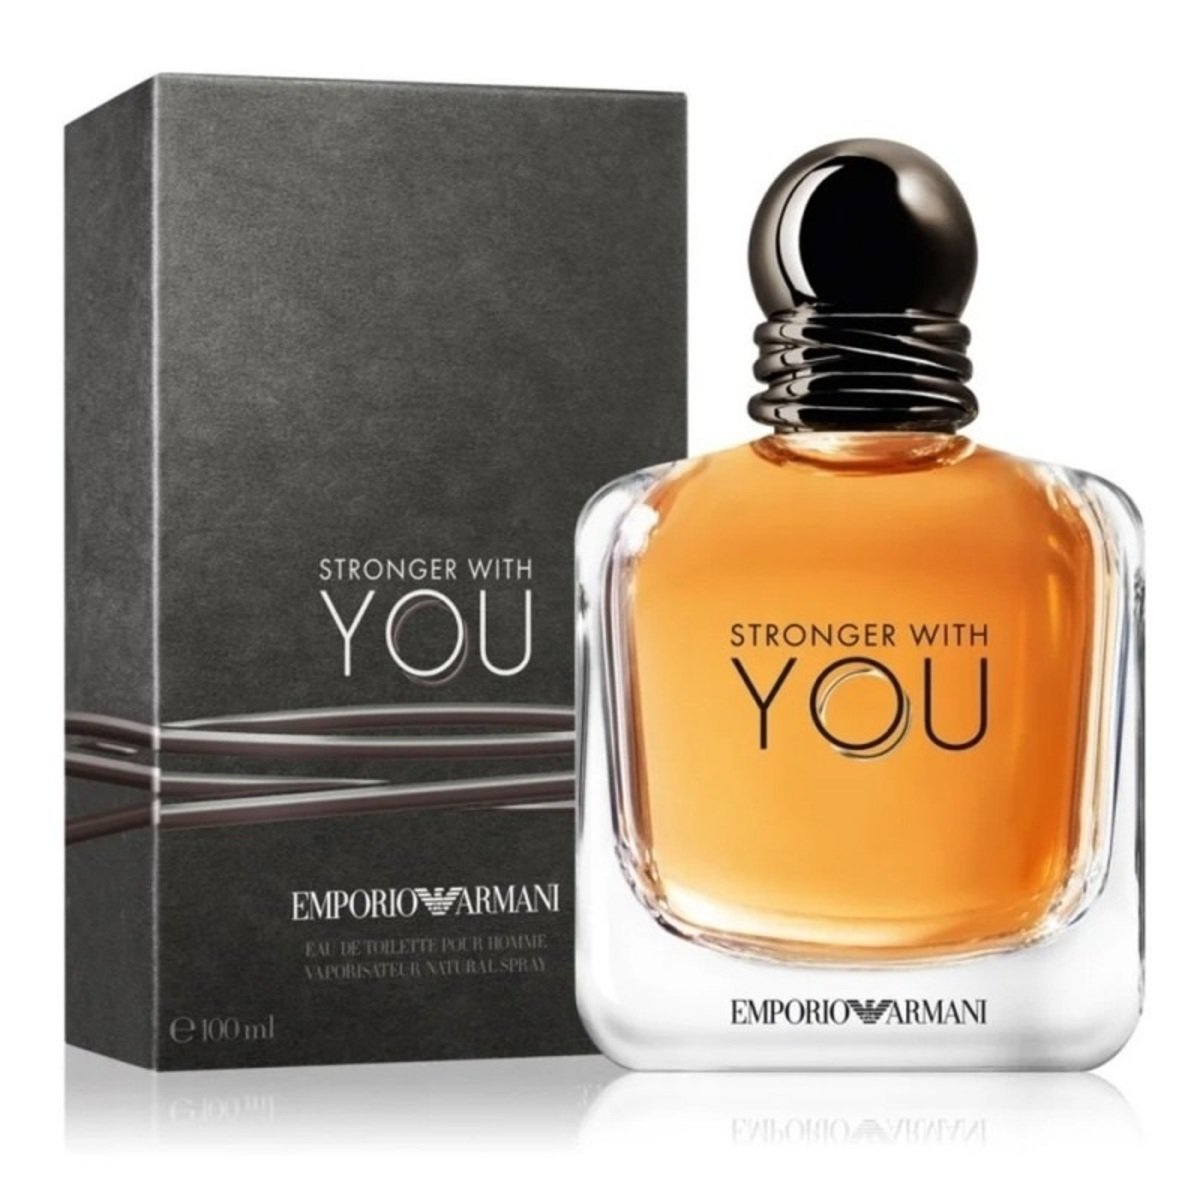 Emporio Armani EDT Stronger With You For Men 100ml